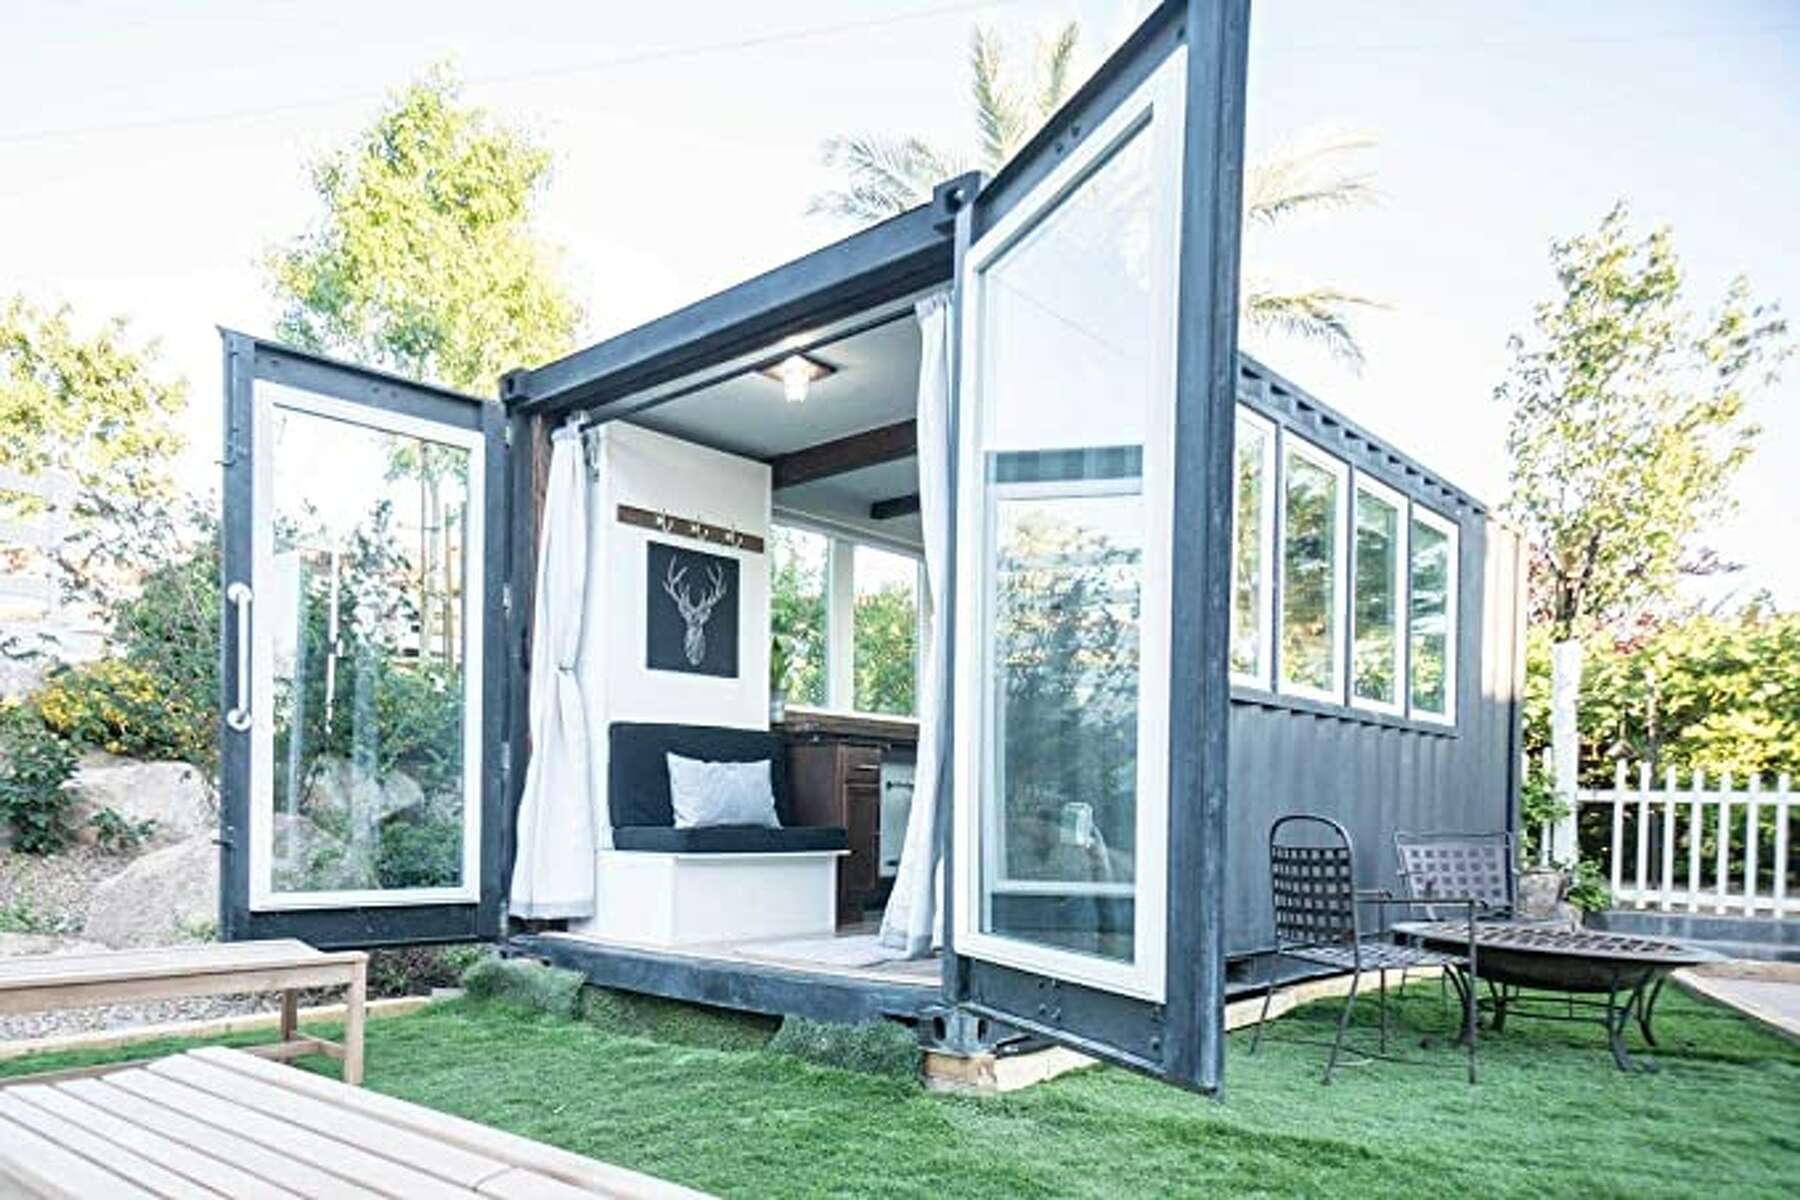 Looking for a Tiny House for Sale? Here are 5 Great Options in